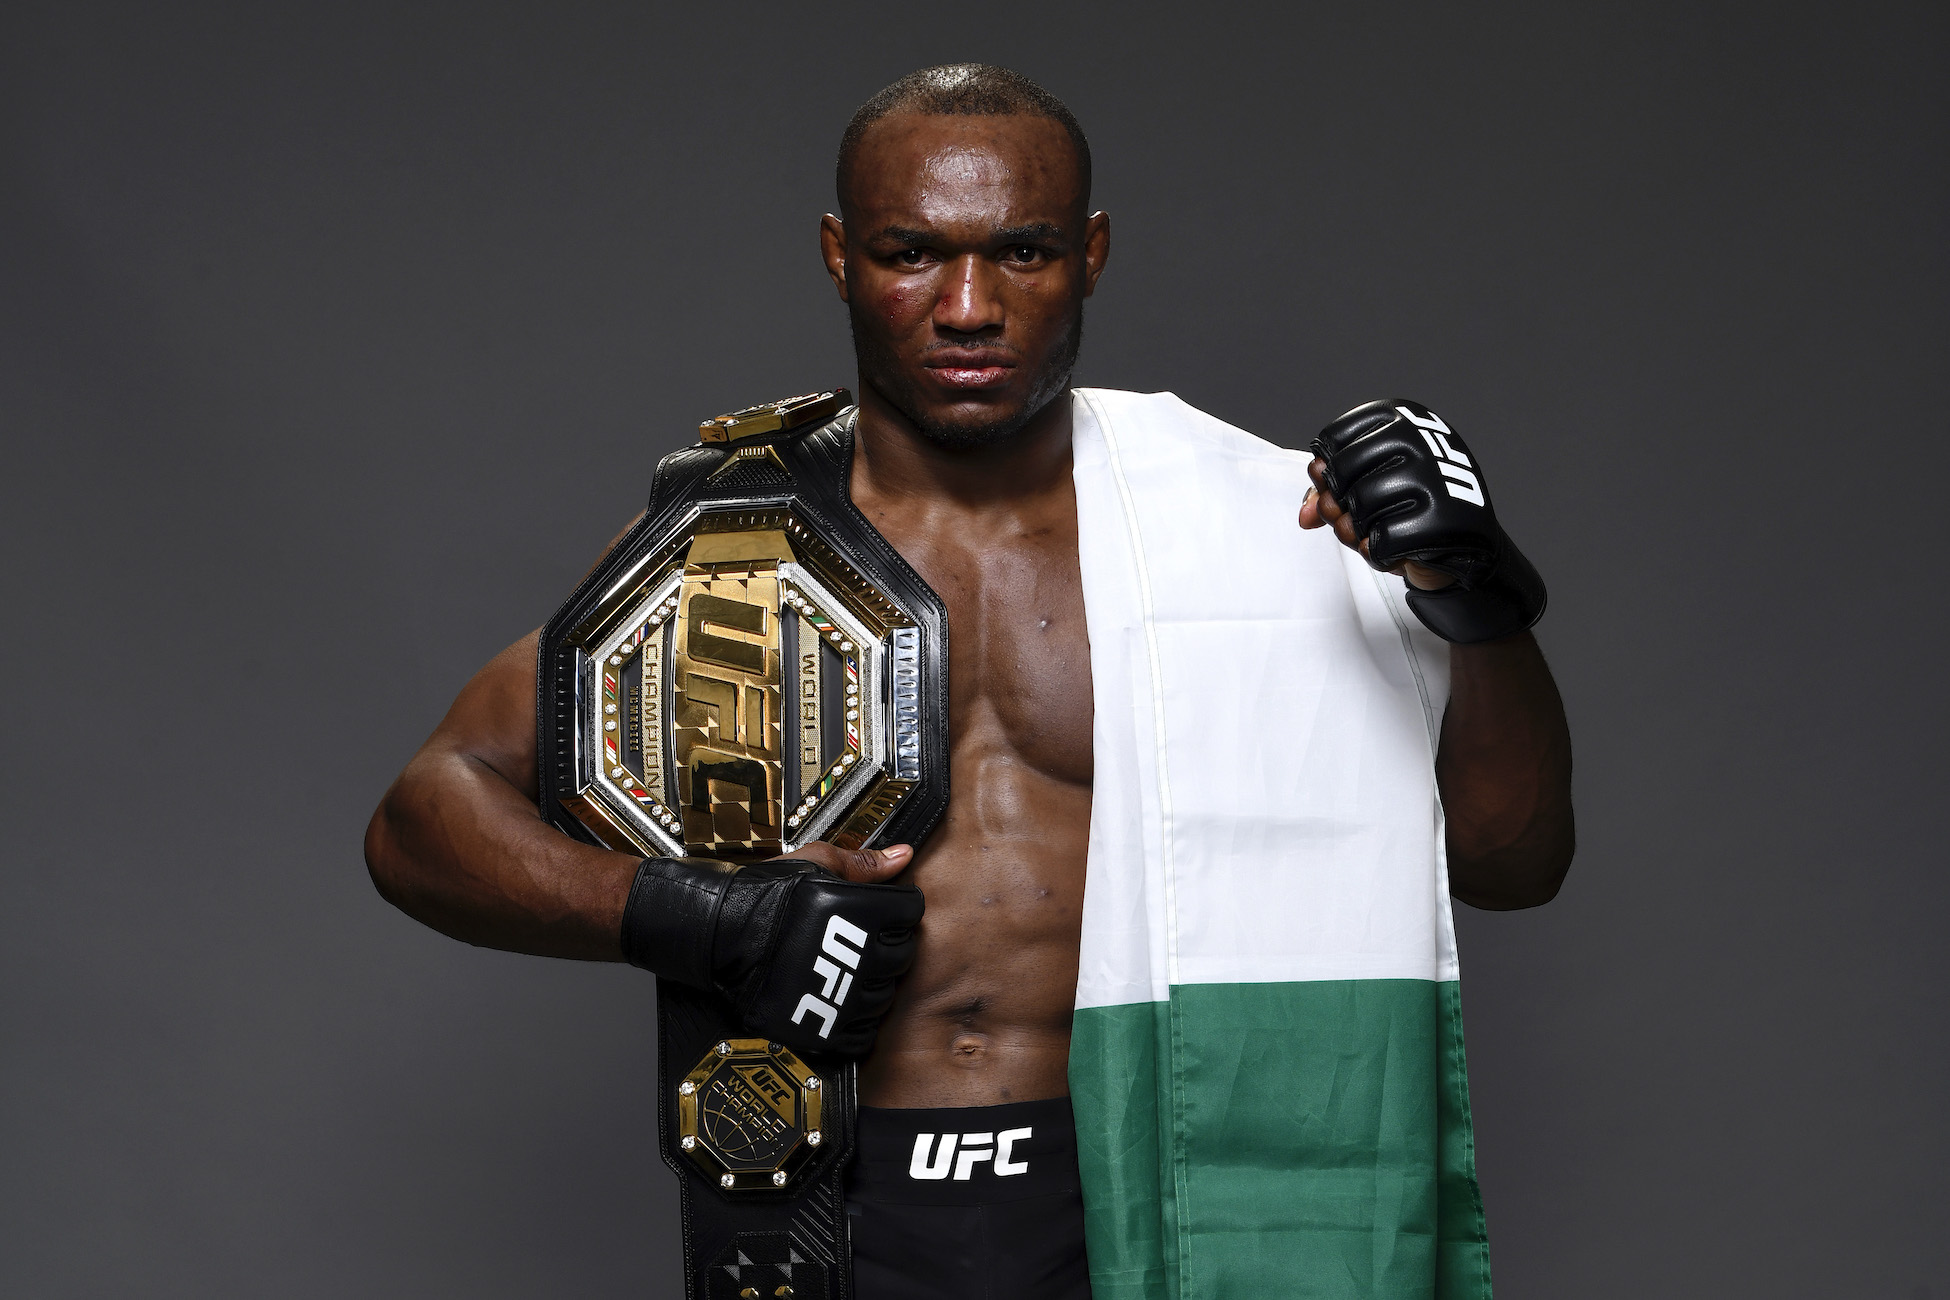 Kamaru Usman is a heavy favorite against Jorge Masvidal ahead of UFC 251. Is he worth laying the big price this Saturday?